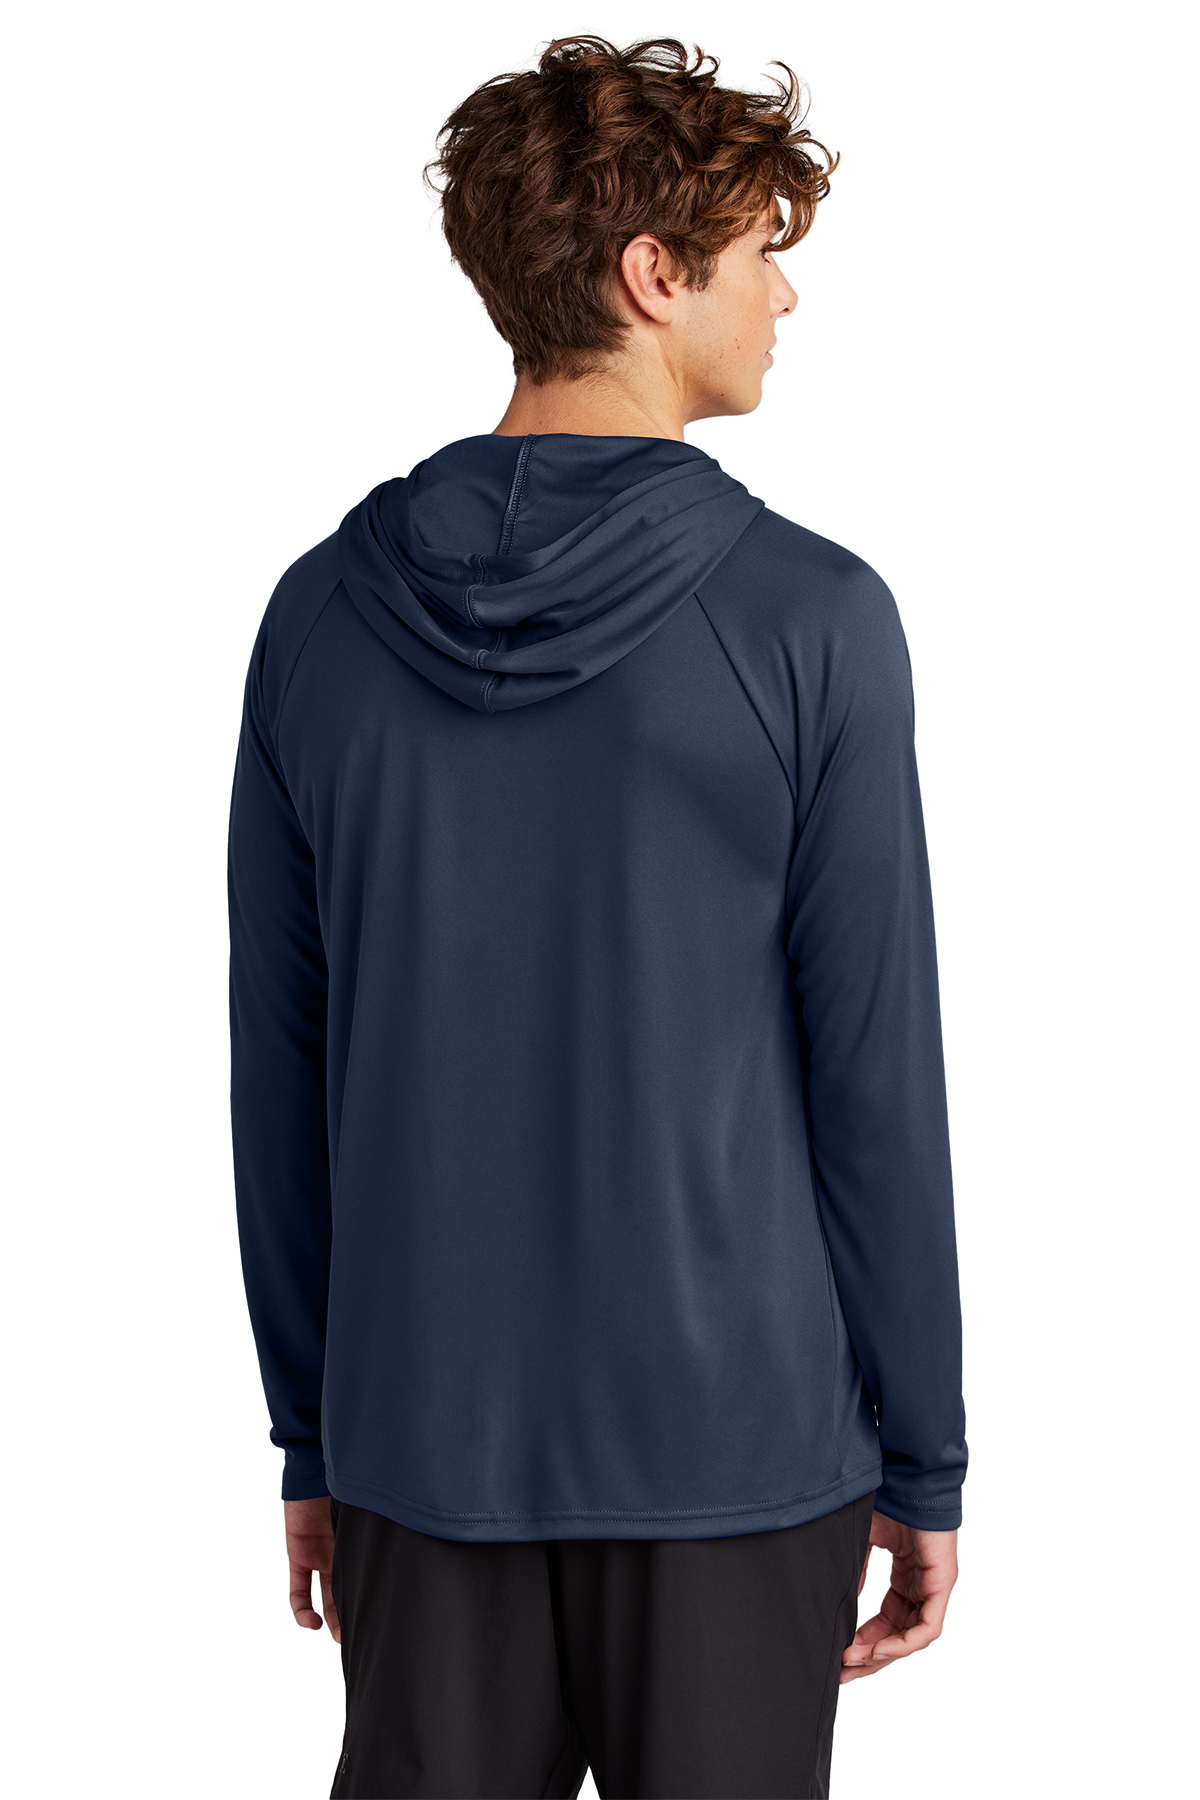 Port & Company Performance Pullover Hooded Tee | Product | SanMar